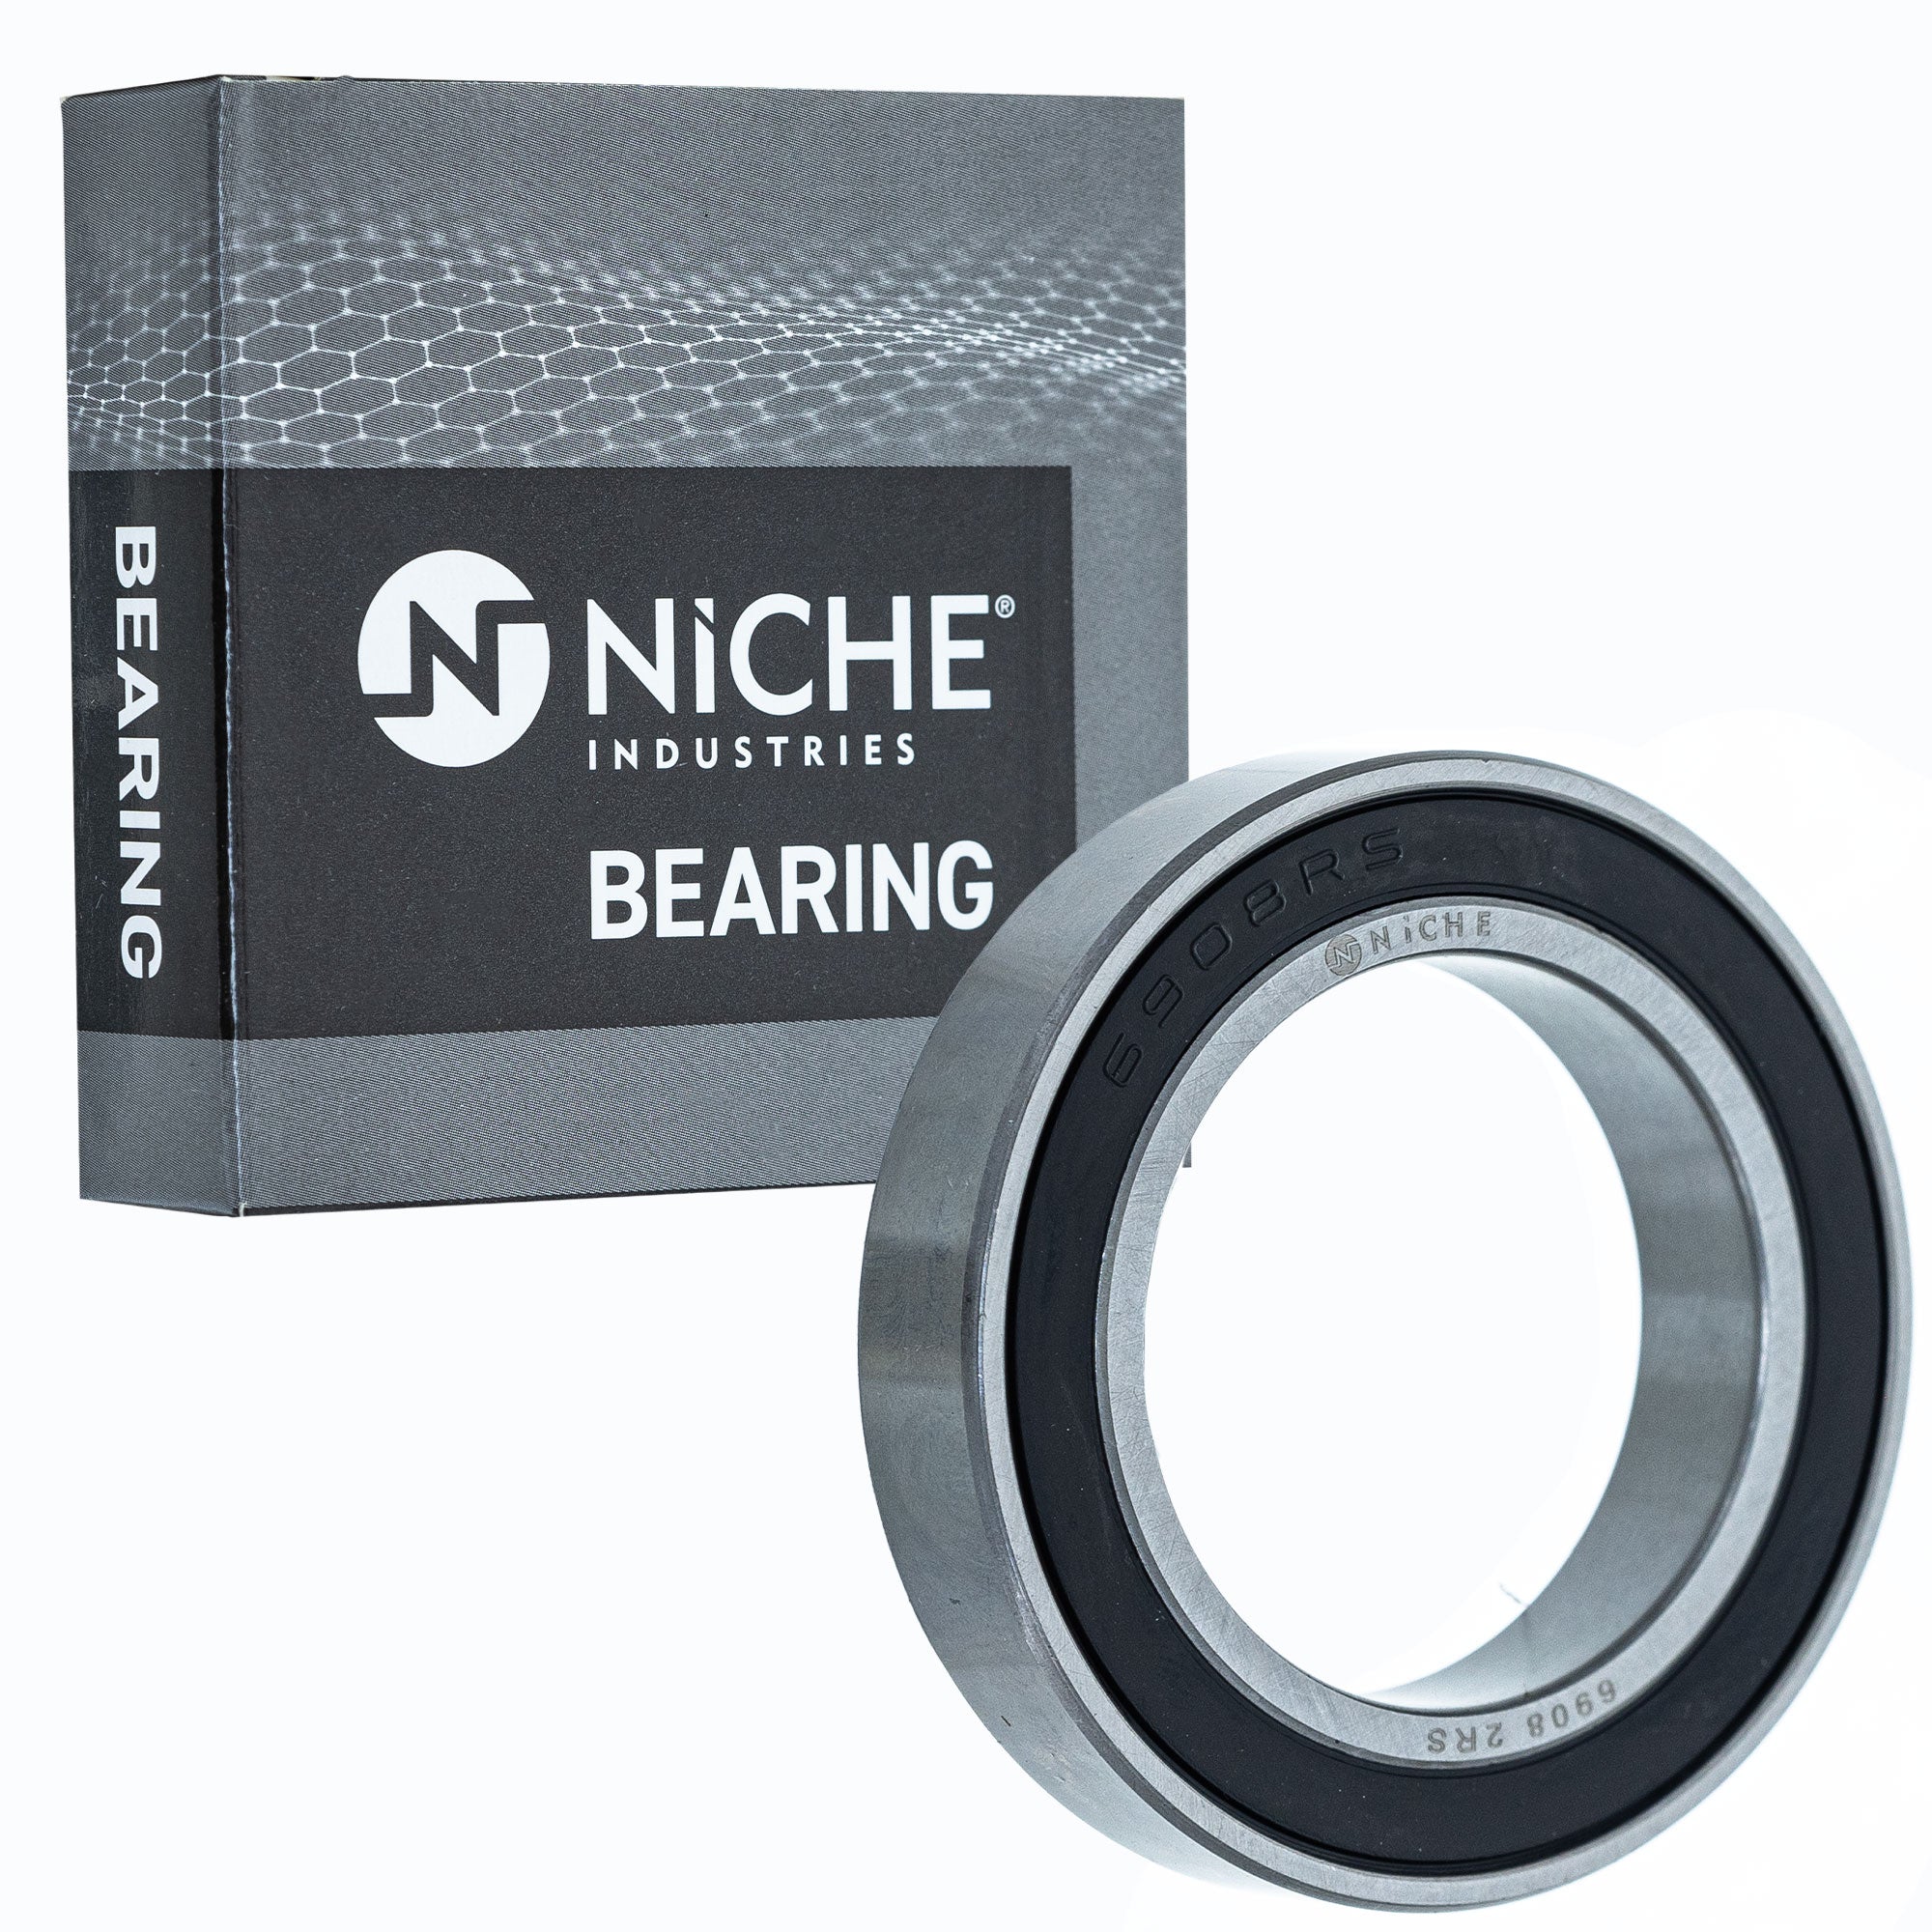 NICHE 519-CBB2248R Bearing 10-Pack for zOTHER BRP Can-Am Ski-Doo